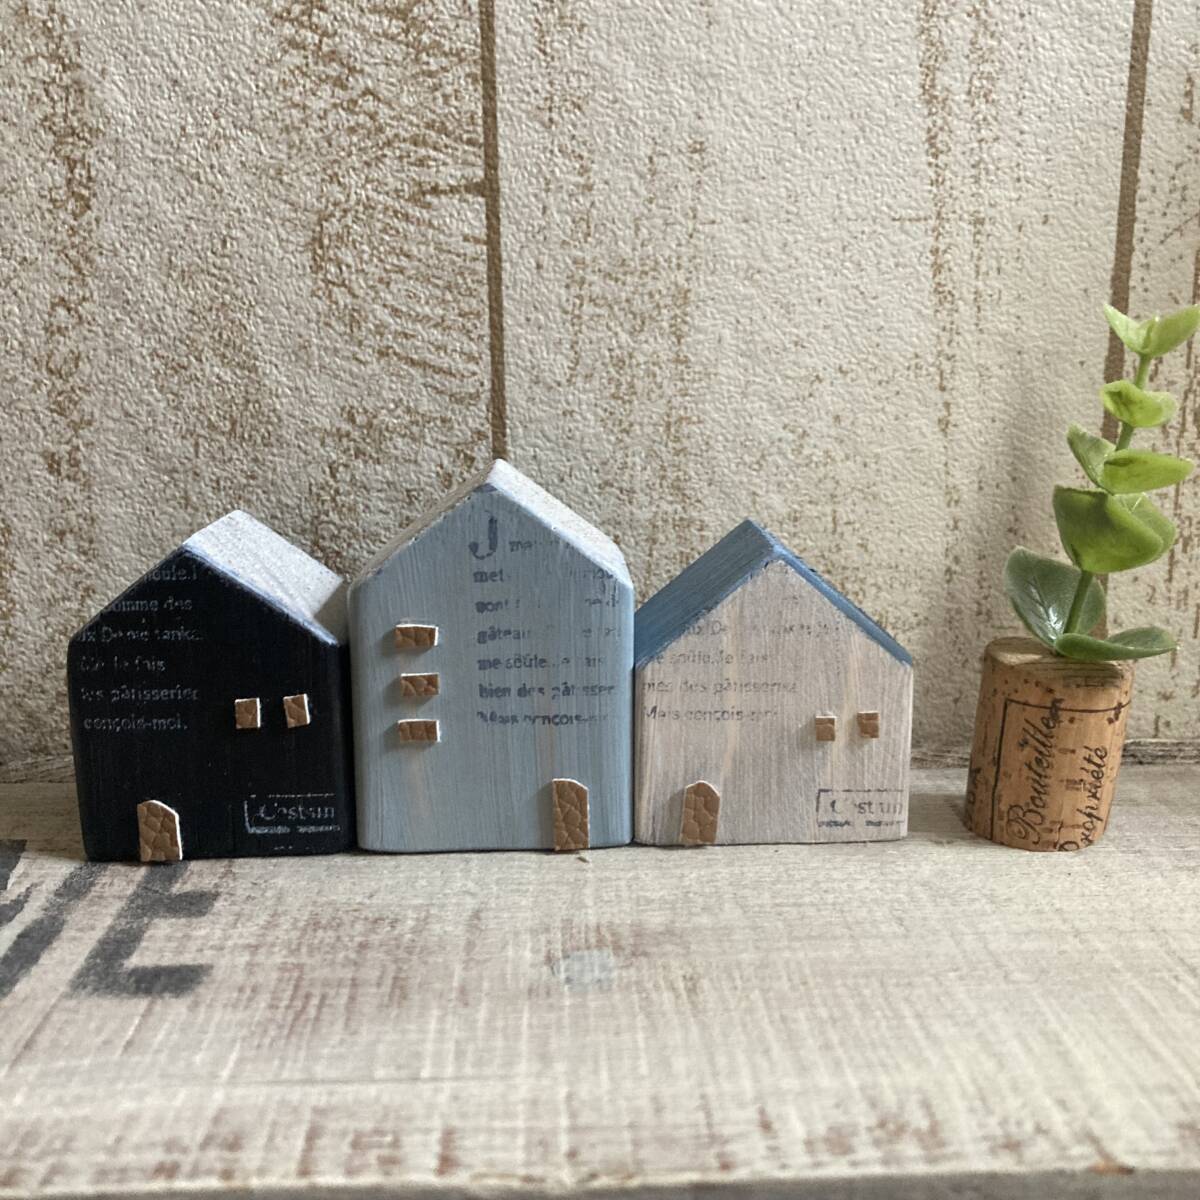 Handmade ☆ Wooden house and cork plant fake green set ♪ Cute wooden house figurine.Miniature house.Nordic style natural interior goods, handmade works, interior, miscellaneous goods, ornament, object